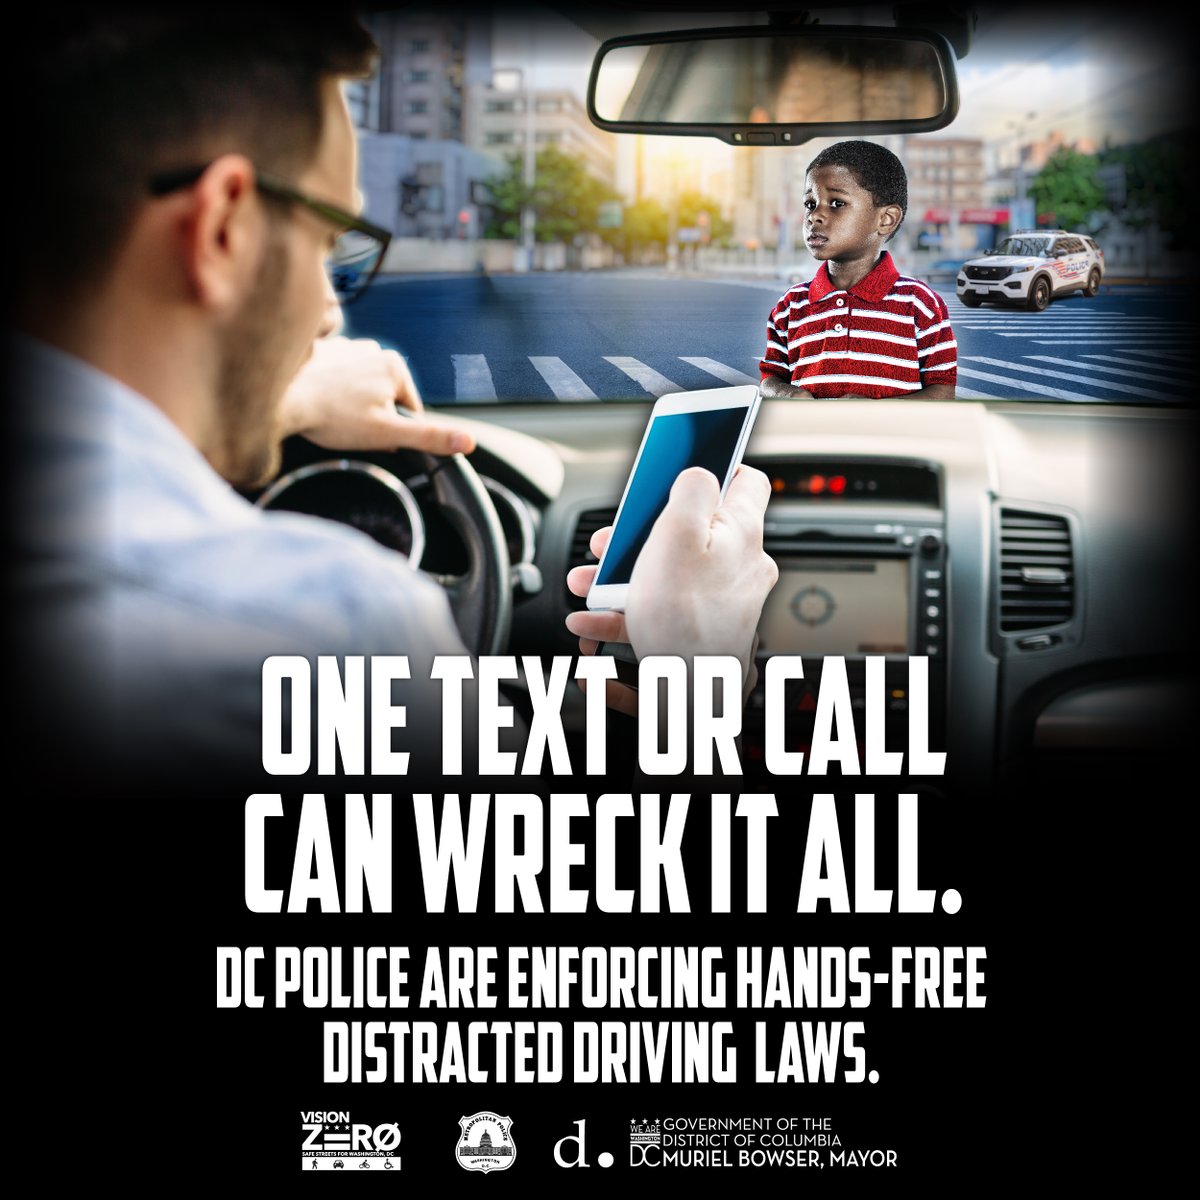 #DC’s hands-free law saves lives. Never use a phone while driving without a hands-free device. One text or call could wreck it all. #VisionZeroDC #DistractedDriving